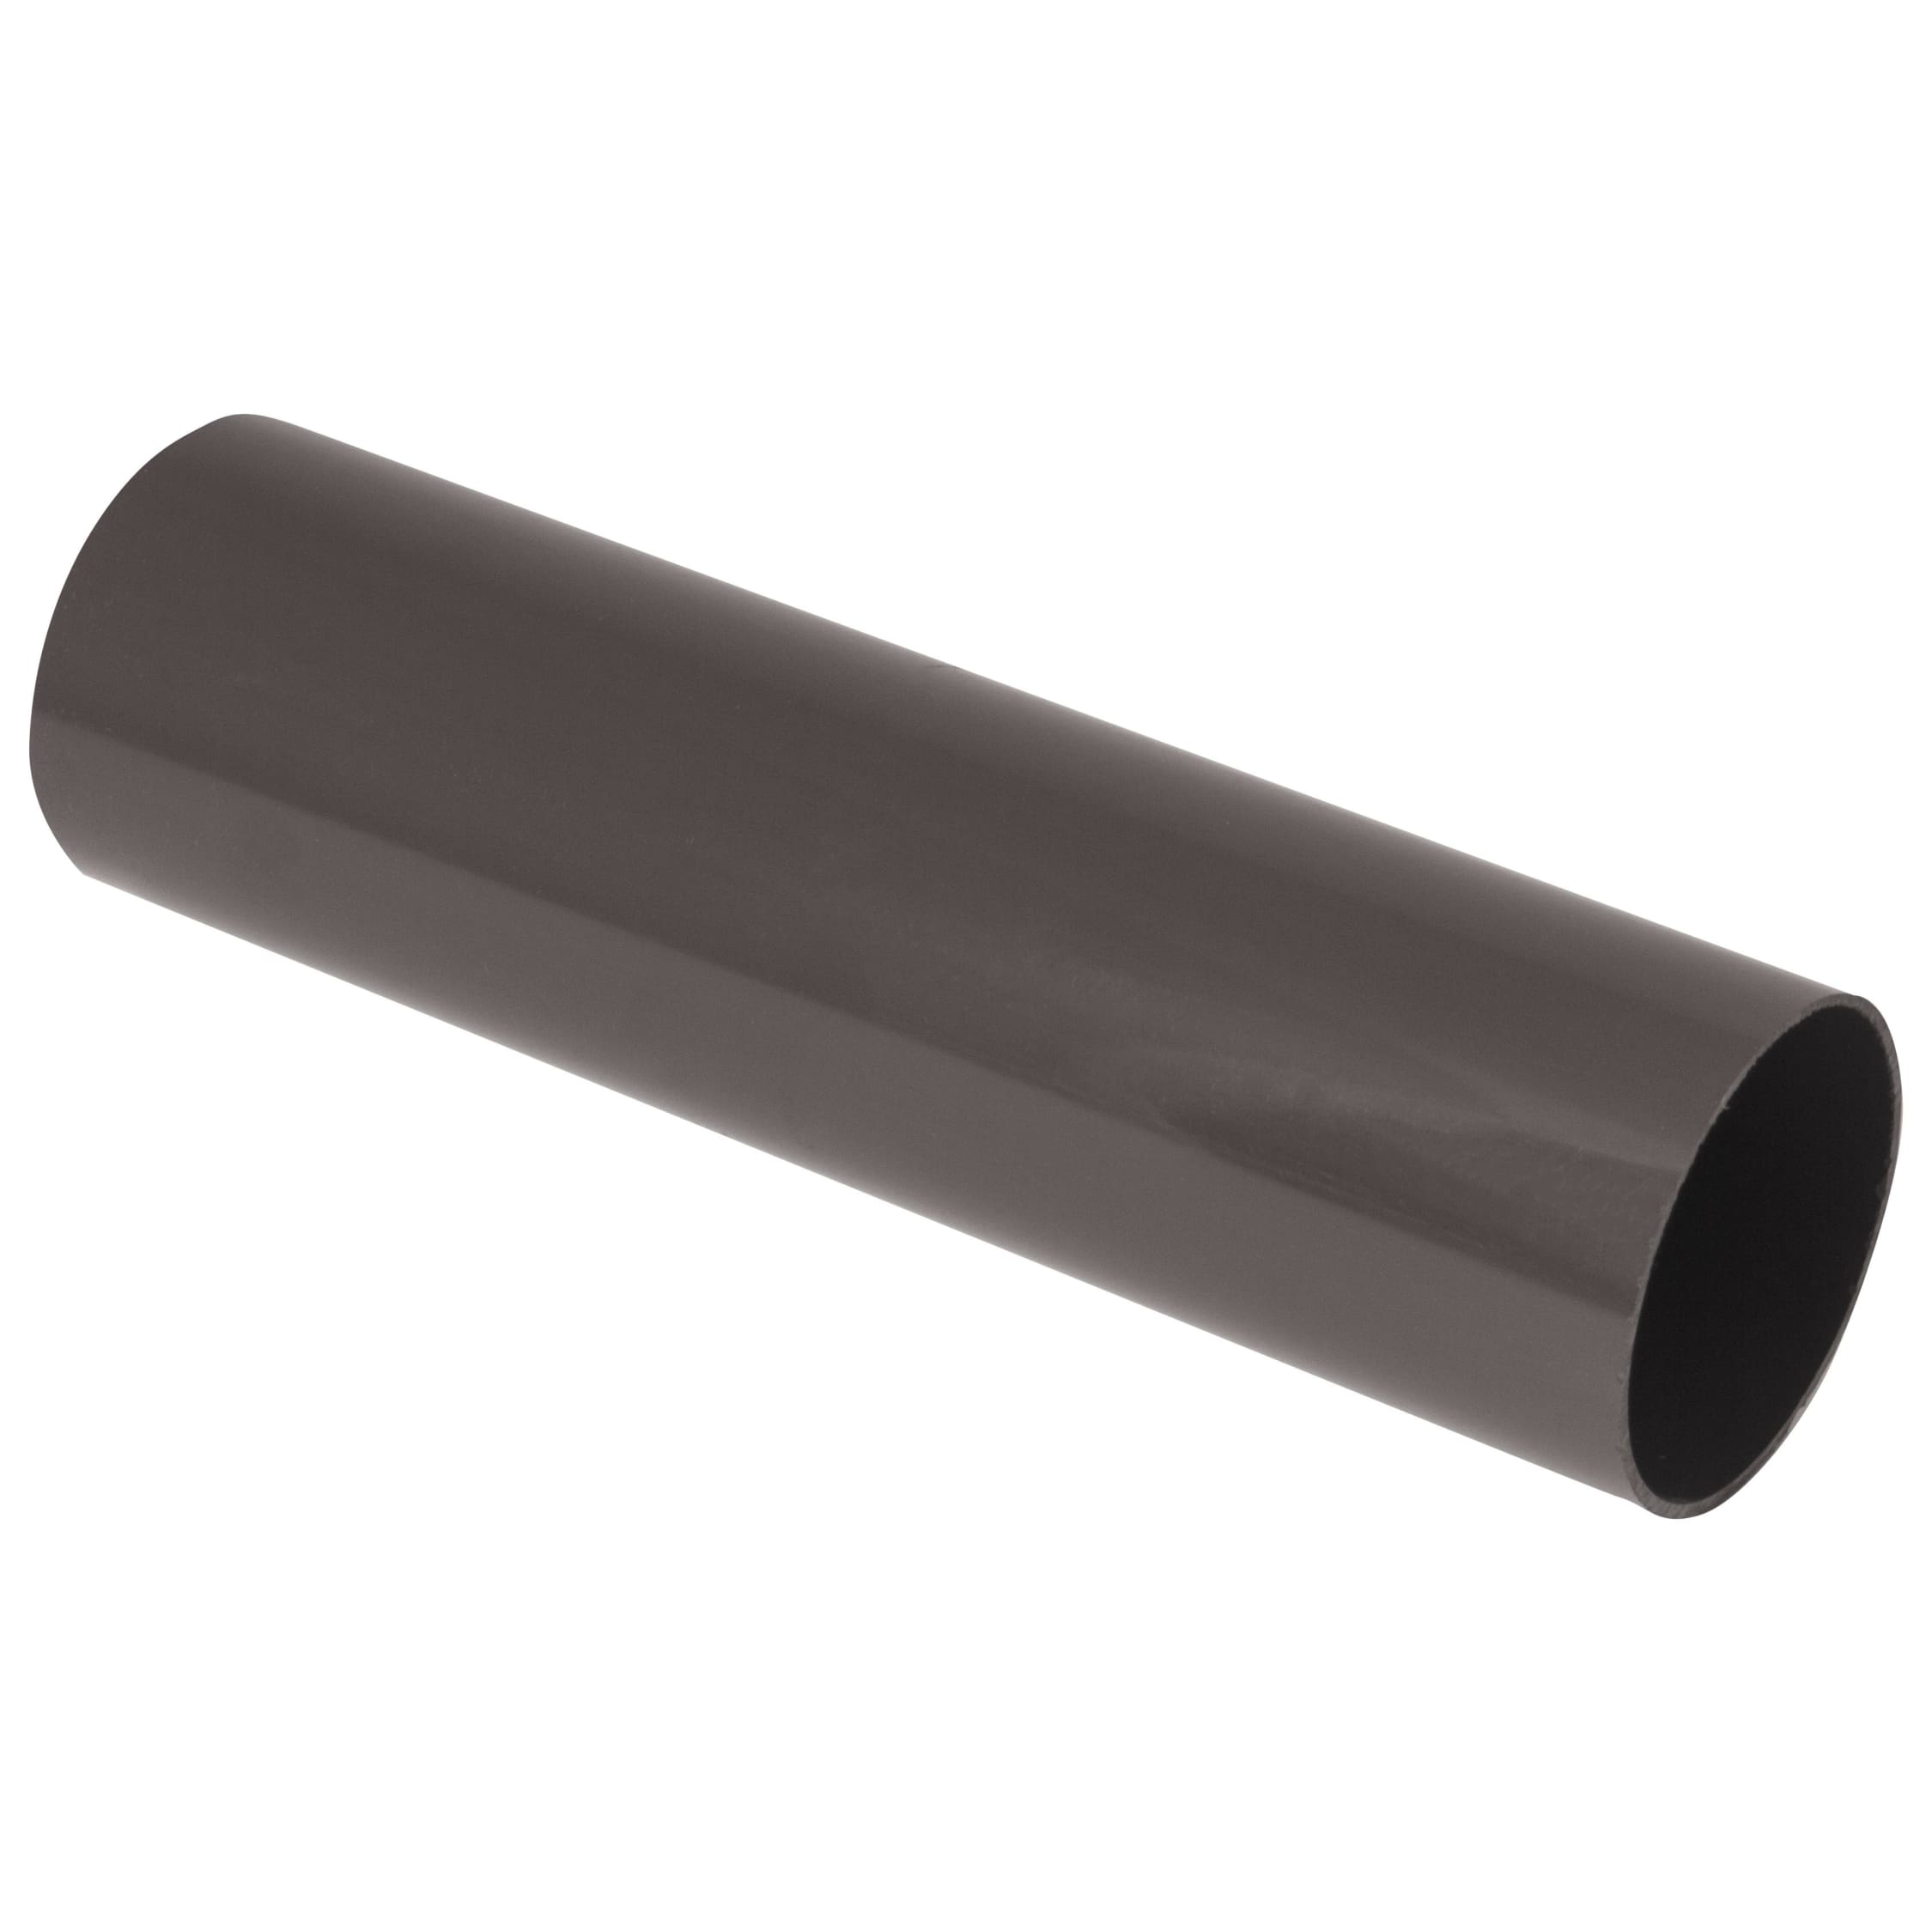 Rainwater Downpipe 1 Metre Lengths Black Square Or Round 68mm Pipe